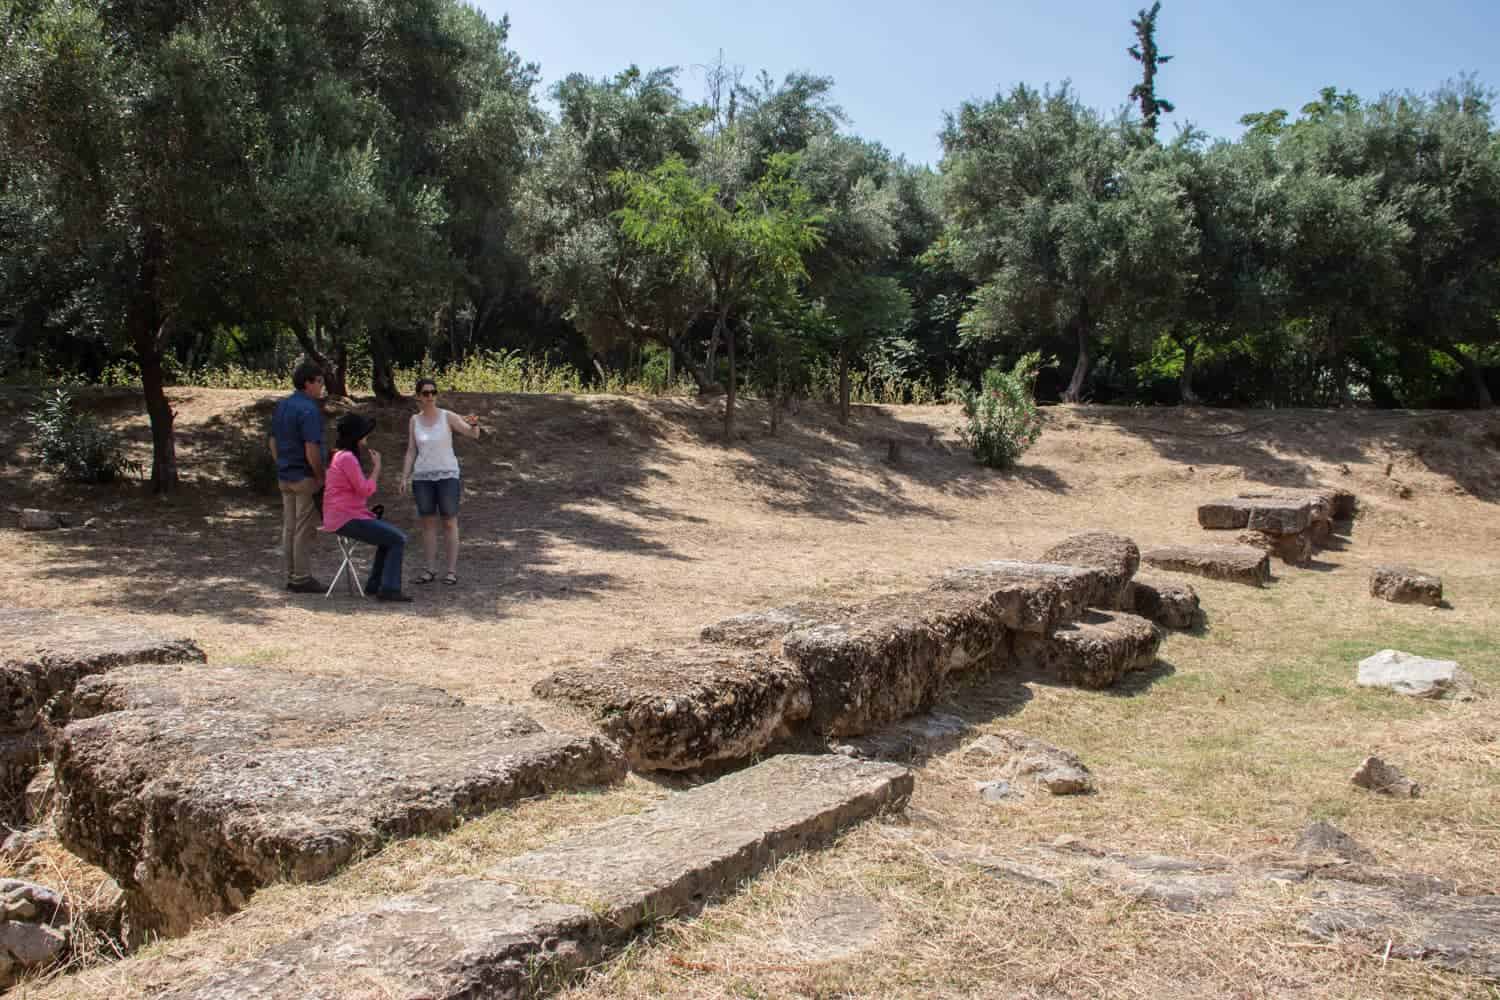 A woman in white points to a tree-back field of ruins as a man in blue and woman in pink look on - part of a Philosophy walking tours in Athens at Plato's Academy.